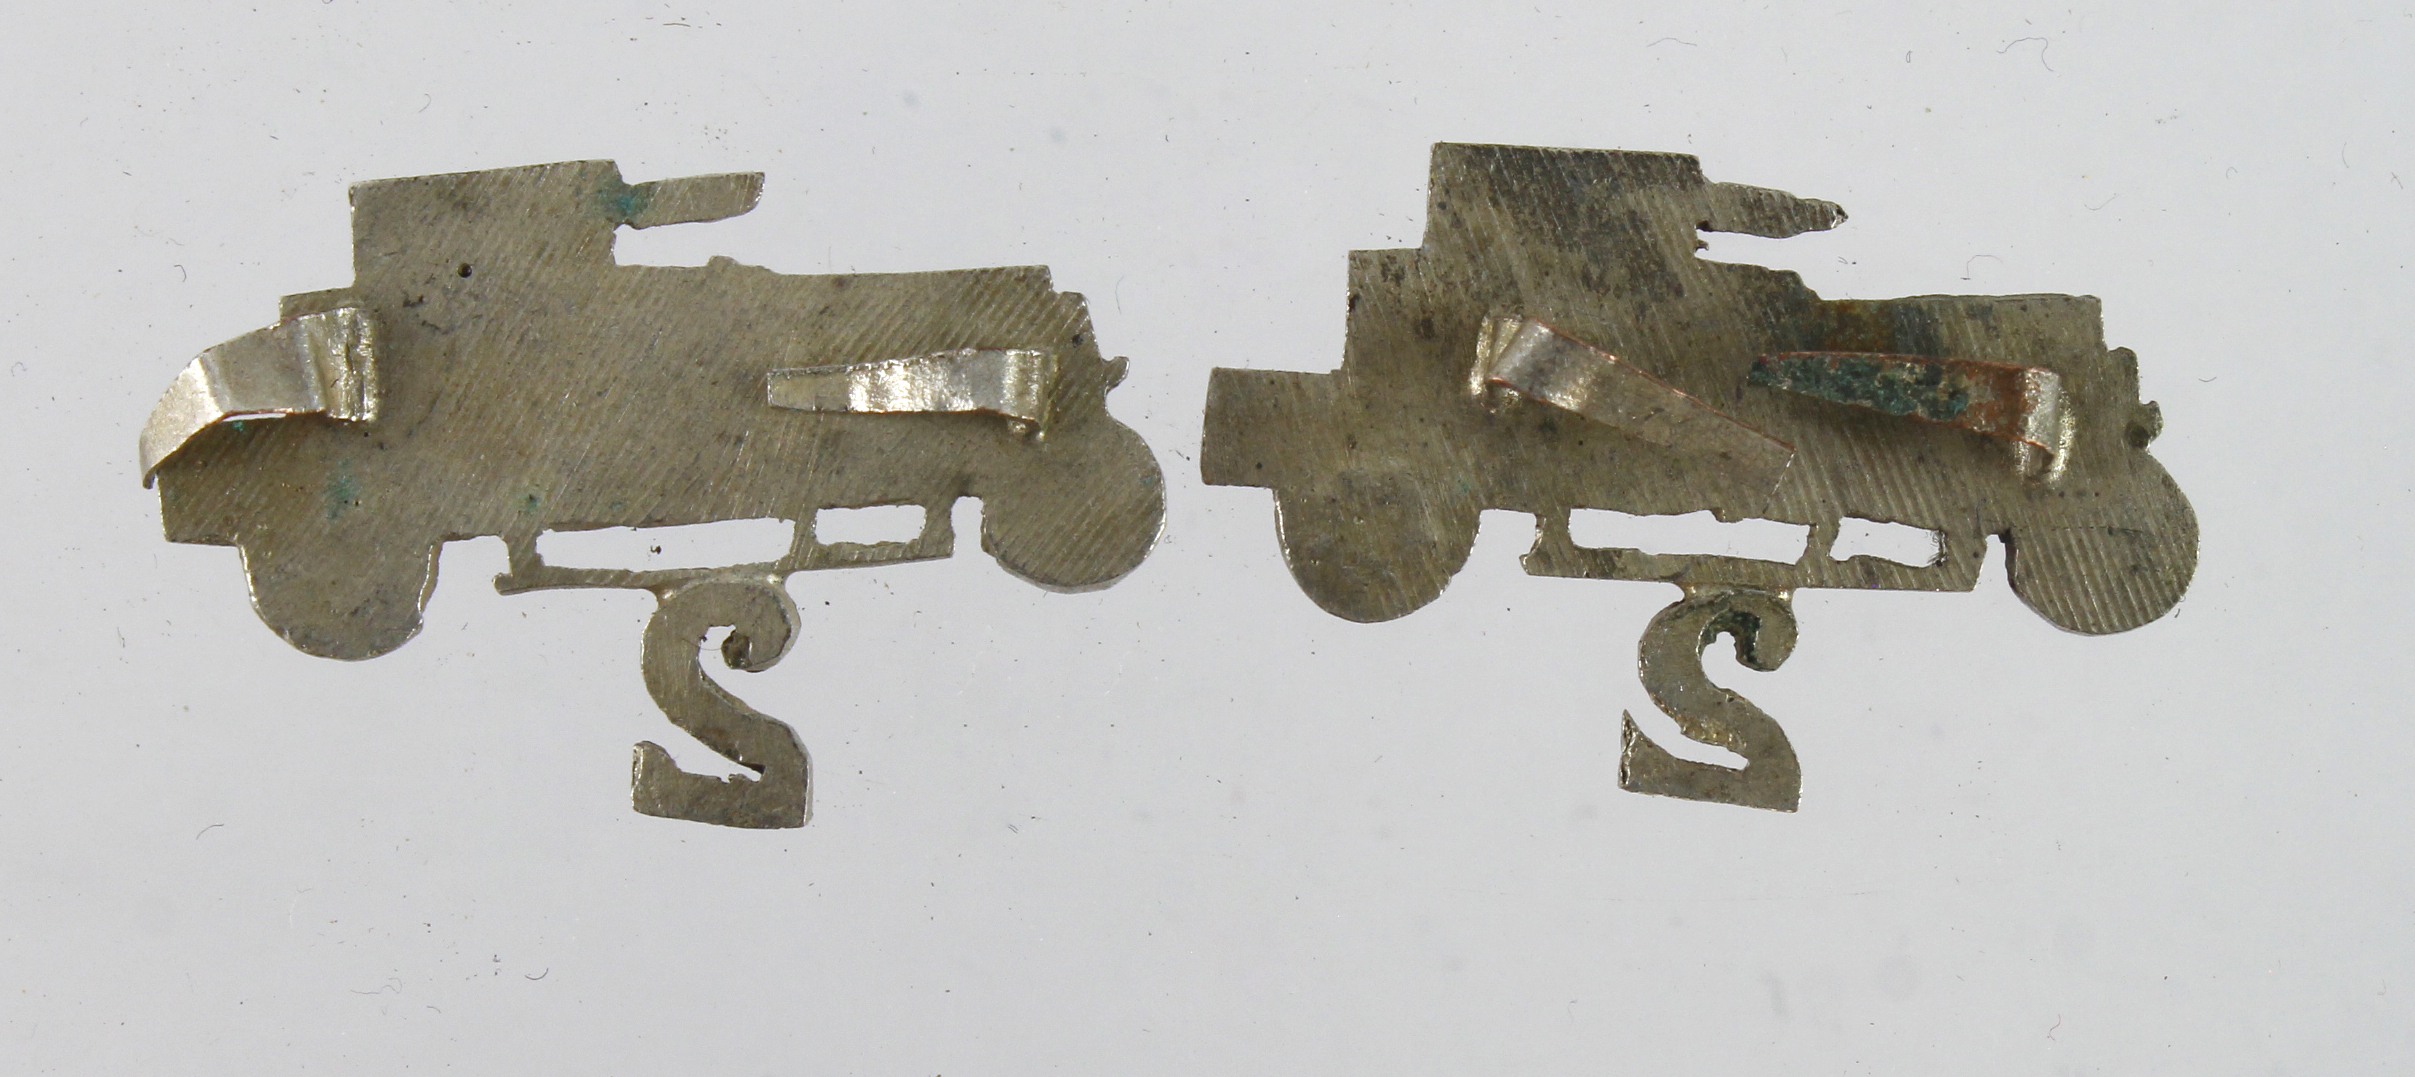 Collar dogs, 2nd light armoured motor car battery, white metal, locally made. - Image 2 of 2